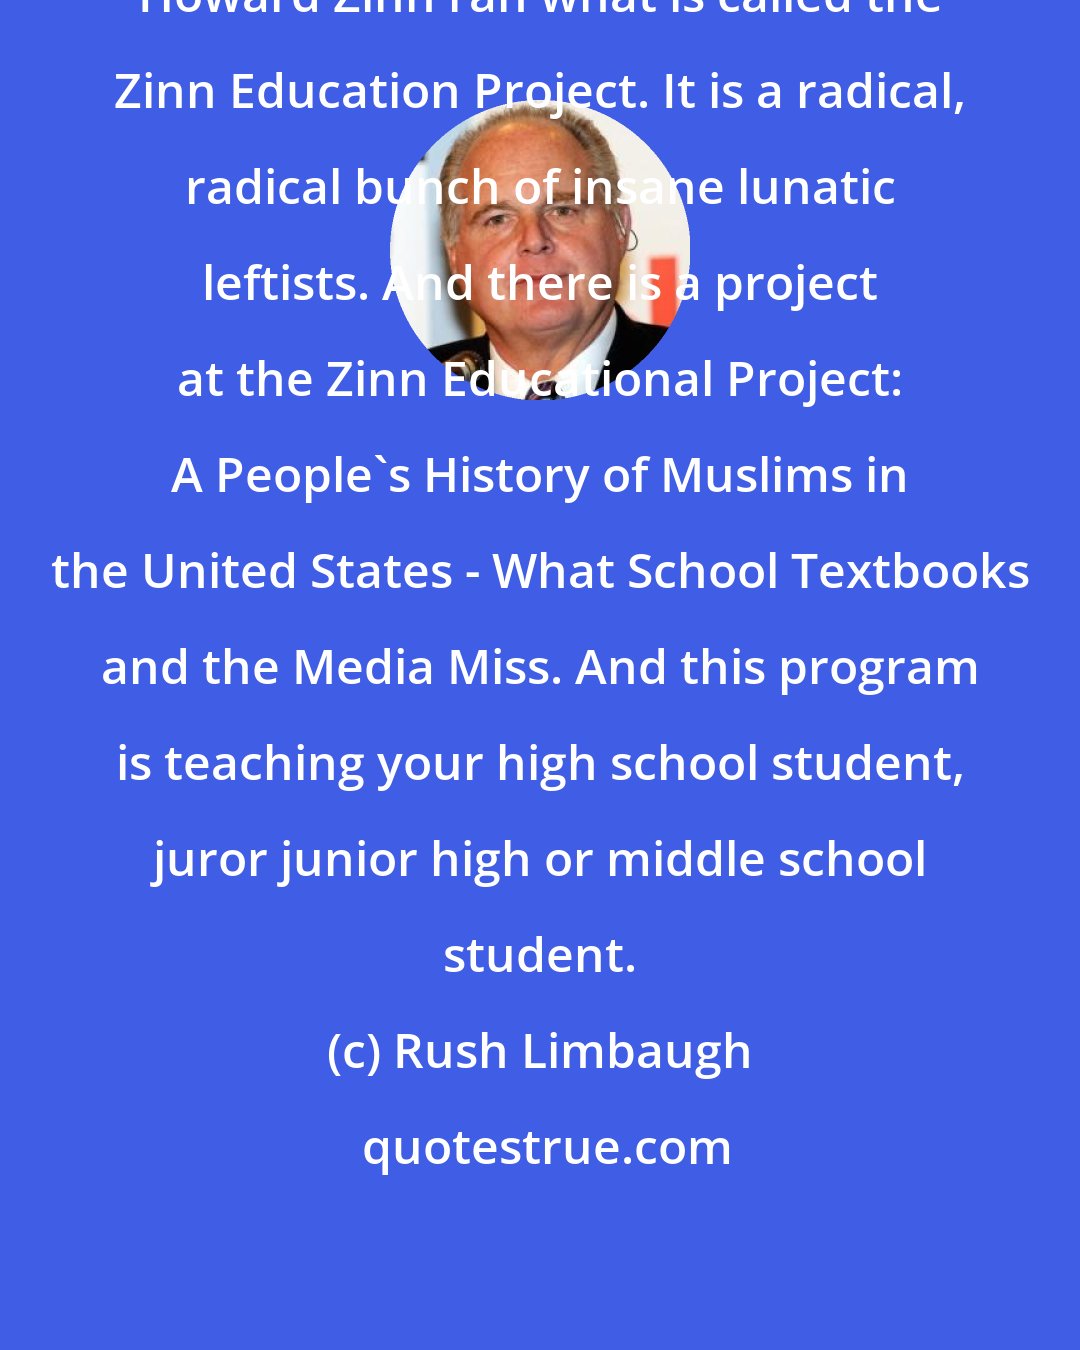 Rush Limbaugh: Howard Zinn ran what is called the Zinn Education Project. It is a radical, radical bunch of insane lunatic leftists. And there is a project at the Zinn Educational Project: A People's History of Muslims in the United States - What School Textbooks and the Media Miss. And this program is teaching your high school student, juror junior high or middle school student.